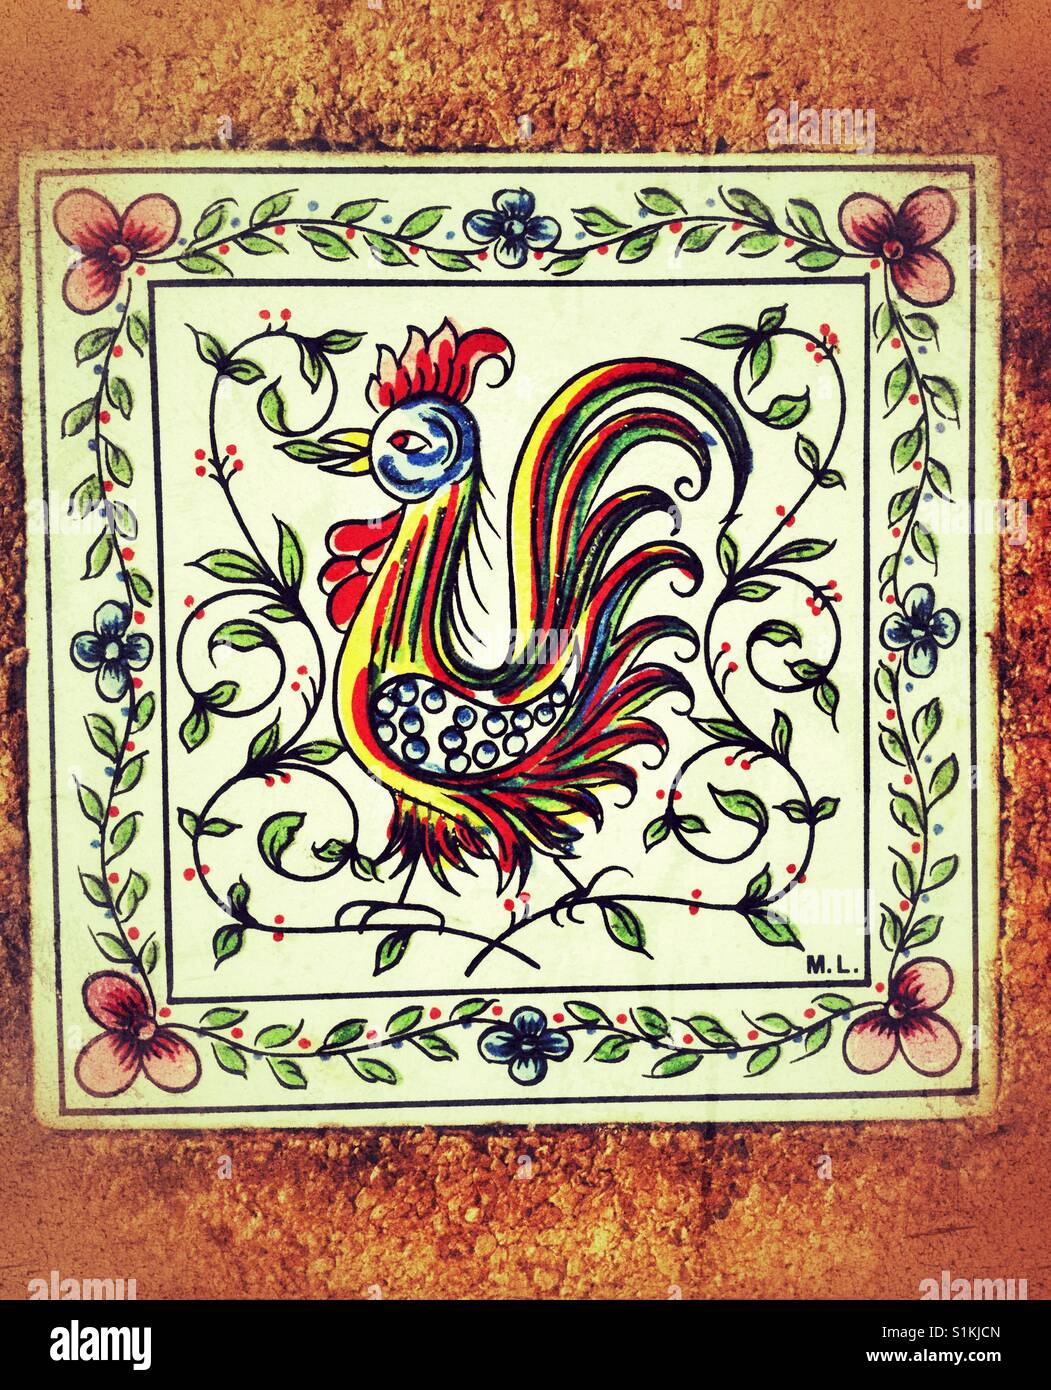 Iconic Portuguese rooster mosaic tile. Stock Photo